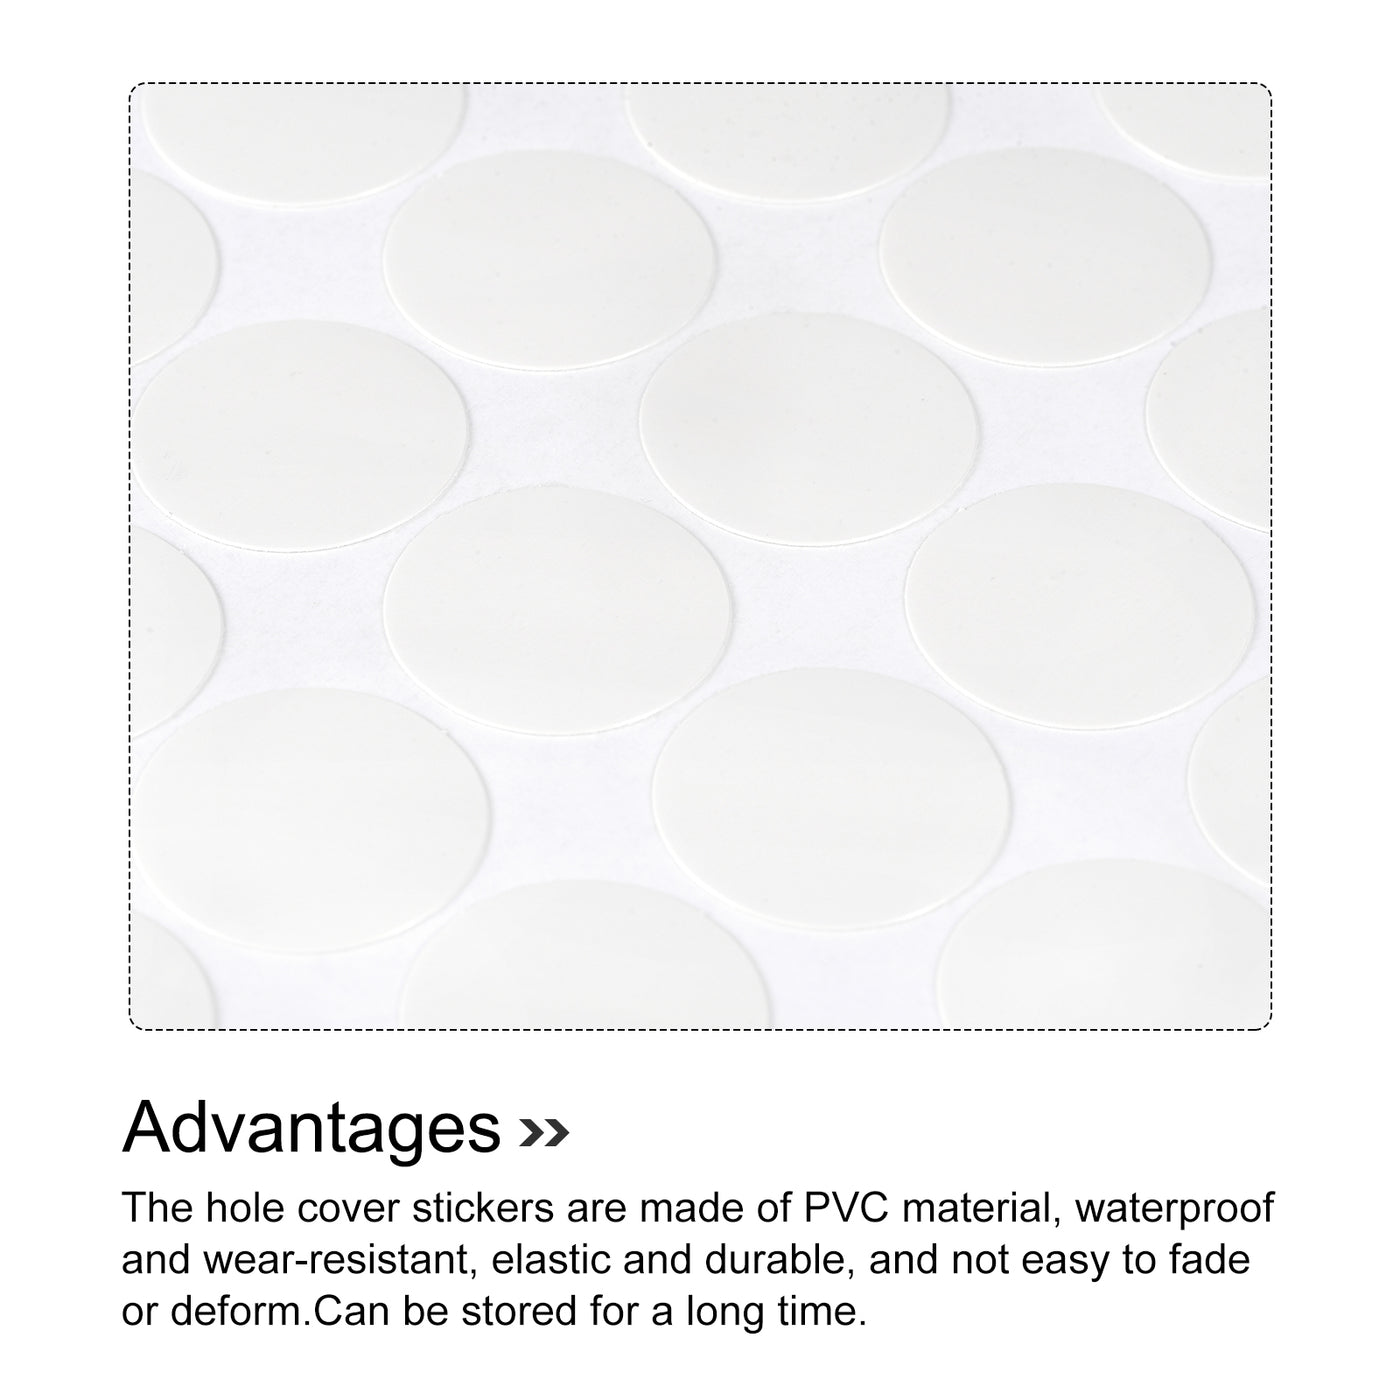 uxcell Uxcell Screw Hole Cover Stickers, 21mm Dia PVC Self Adhesive Covers Caps for Wood Furniture Cabinet Shelf Wardrobe, White 4 Sheet/216pcs